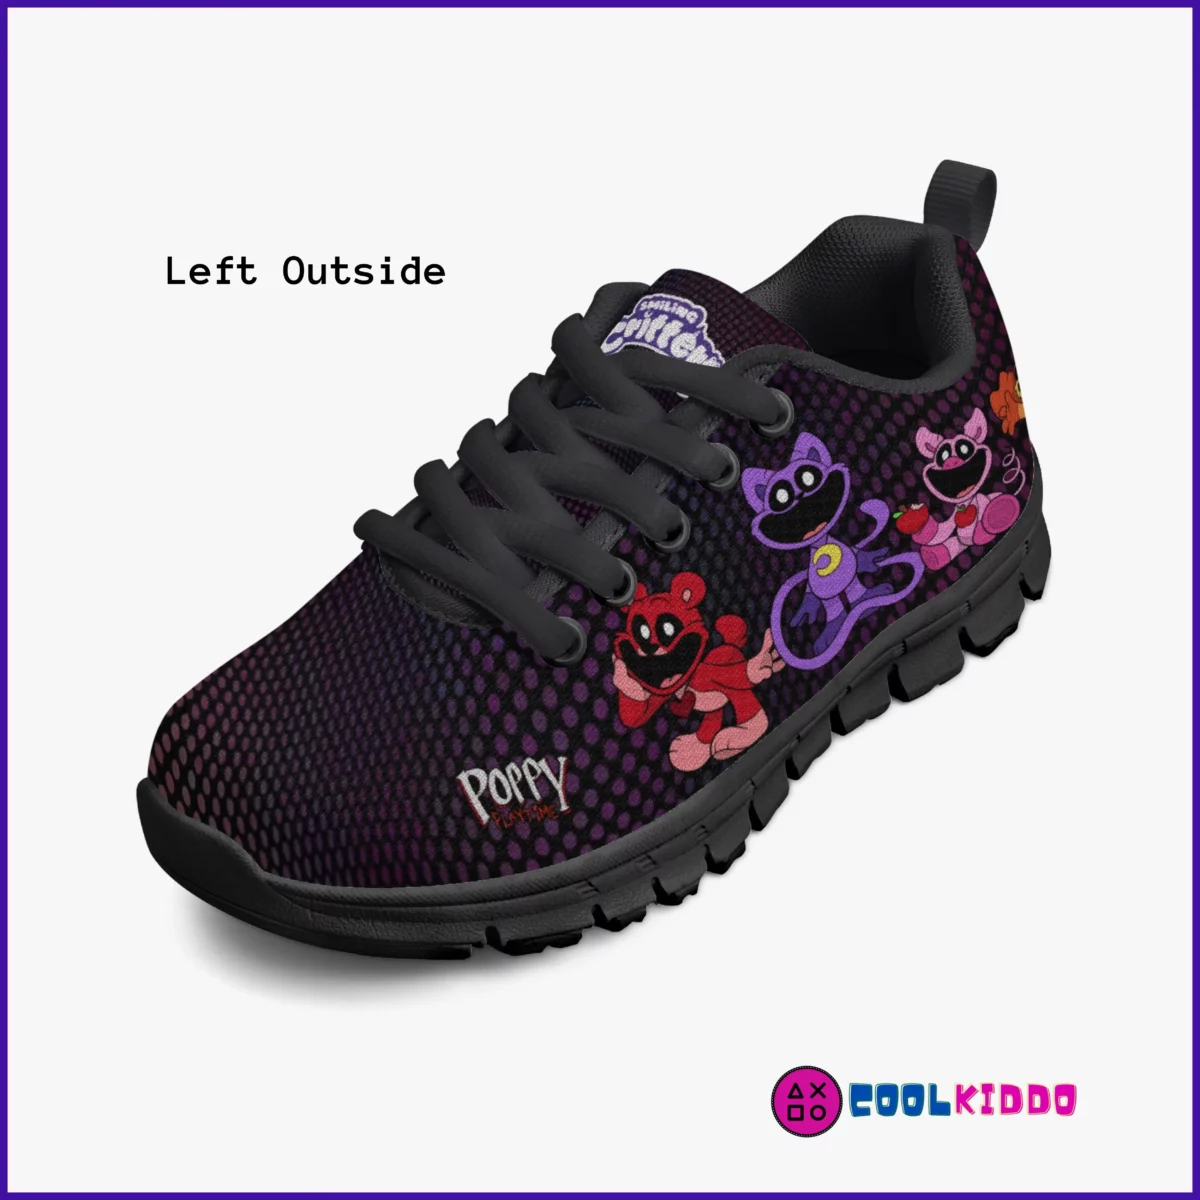 Personalized Smiling Critters Poppy Playtime Inspired Kids’/Youth Lightweight Mesh Sneakers Cool Kiddo 18